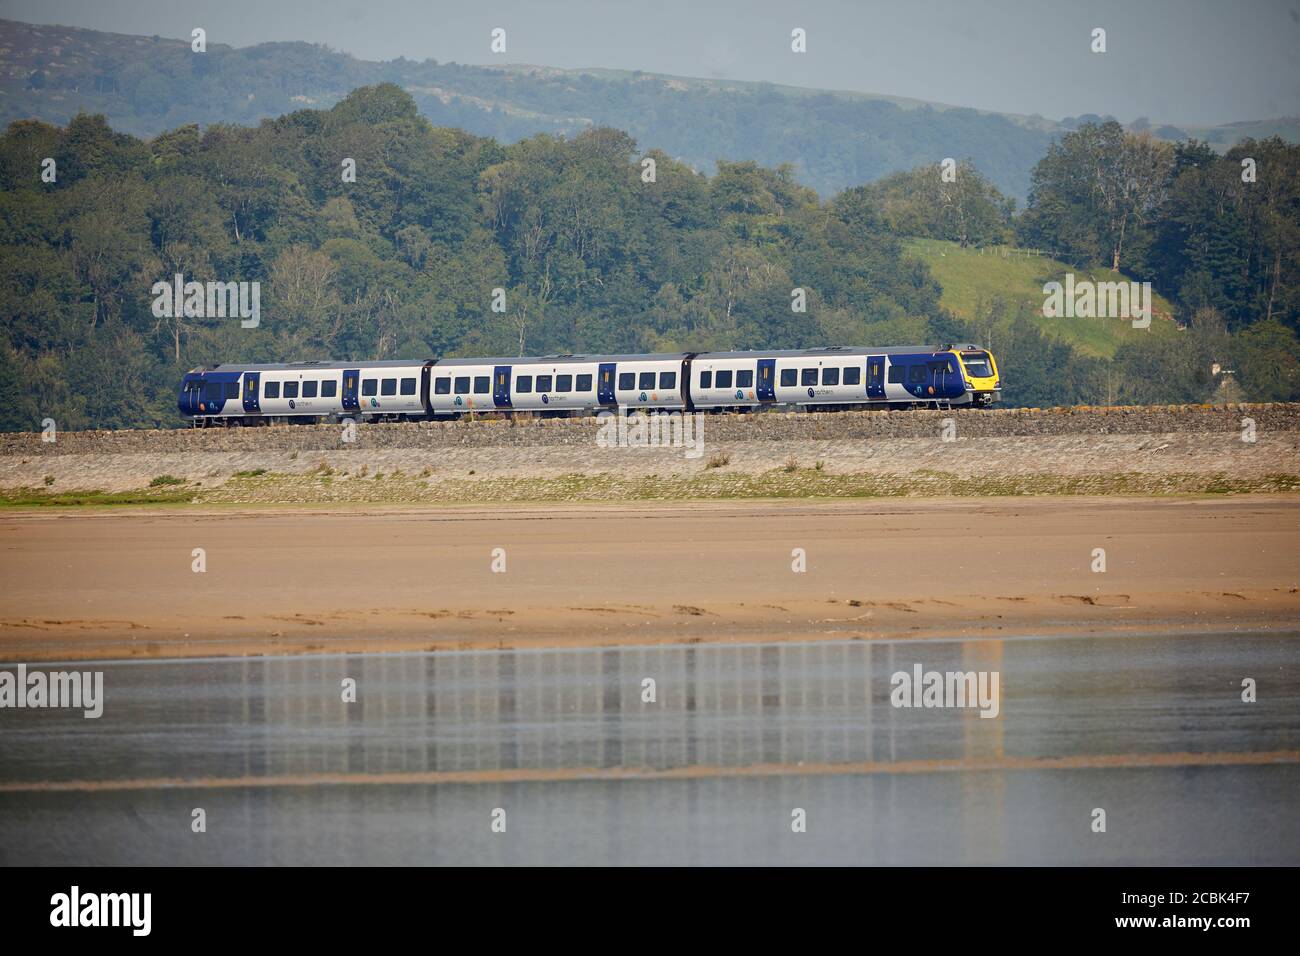 British Rail Class 195 Civity diesel multiple-unit passenger train manufactured by CAF operated by Northern Trains leaves Grange-over-Sands along to c Stock Photo